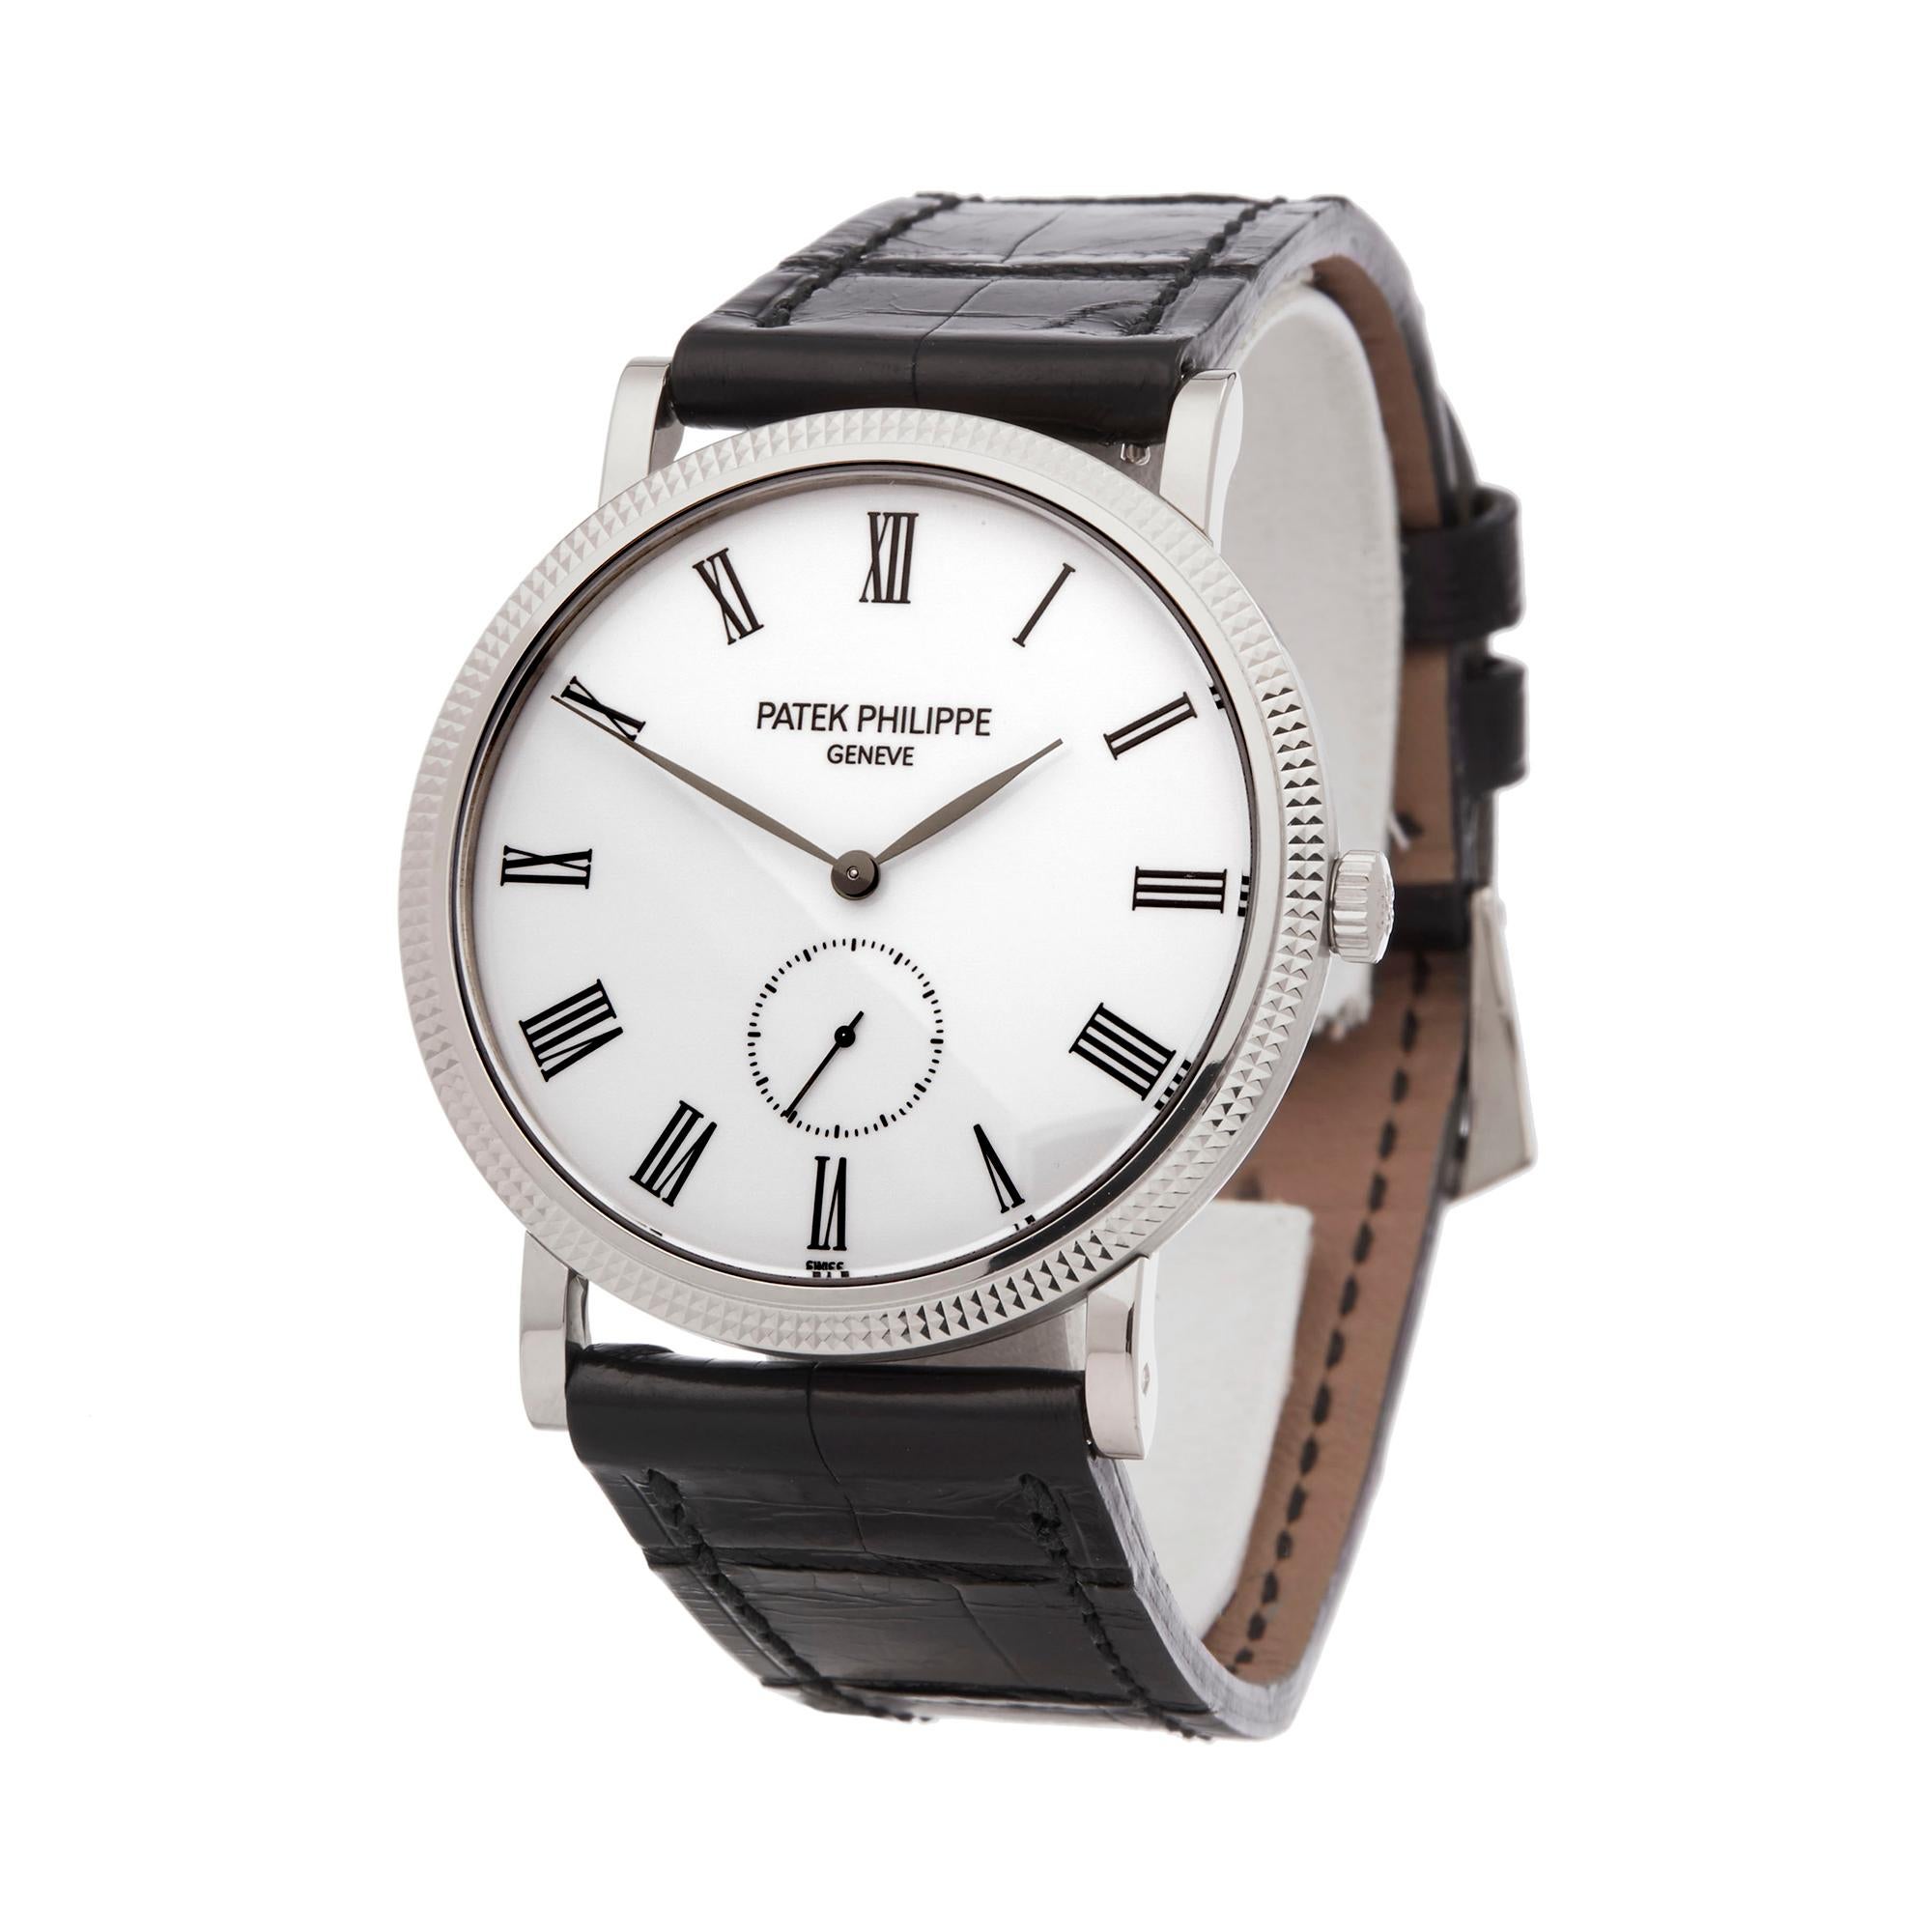 Ref: W6194
Manufacturer: Patek Philippe
Model: Calatrava 
Model Ref: 5119G-001
Age: 6th November 2017
Gender: Mens
Complete With: Box, Manuals, Guarantee & Holder 
Dial: White Roman 
Glass: Sapphire Crystal
Movement: Mechanical Wind
Water